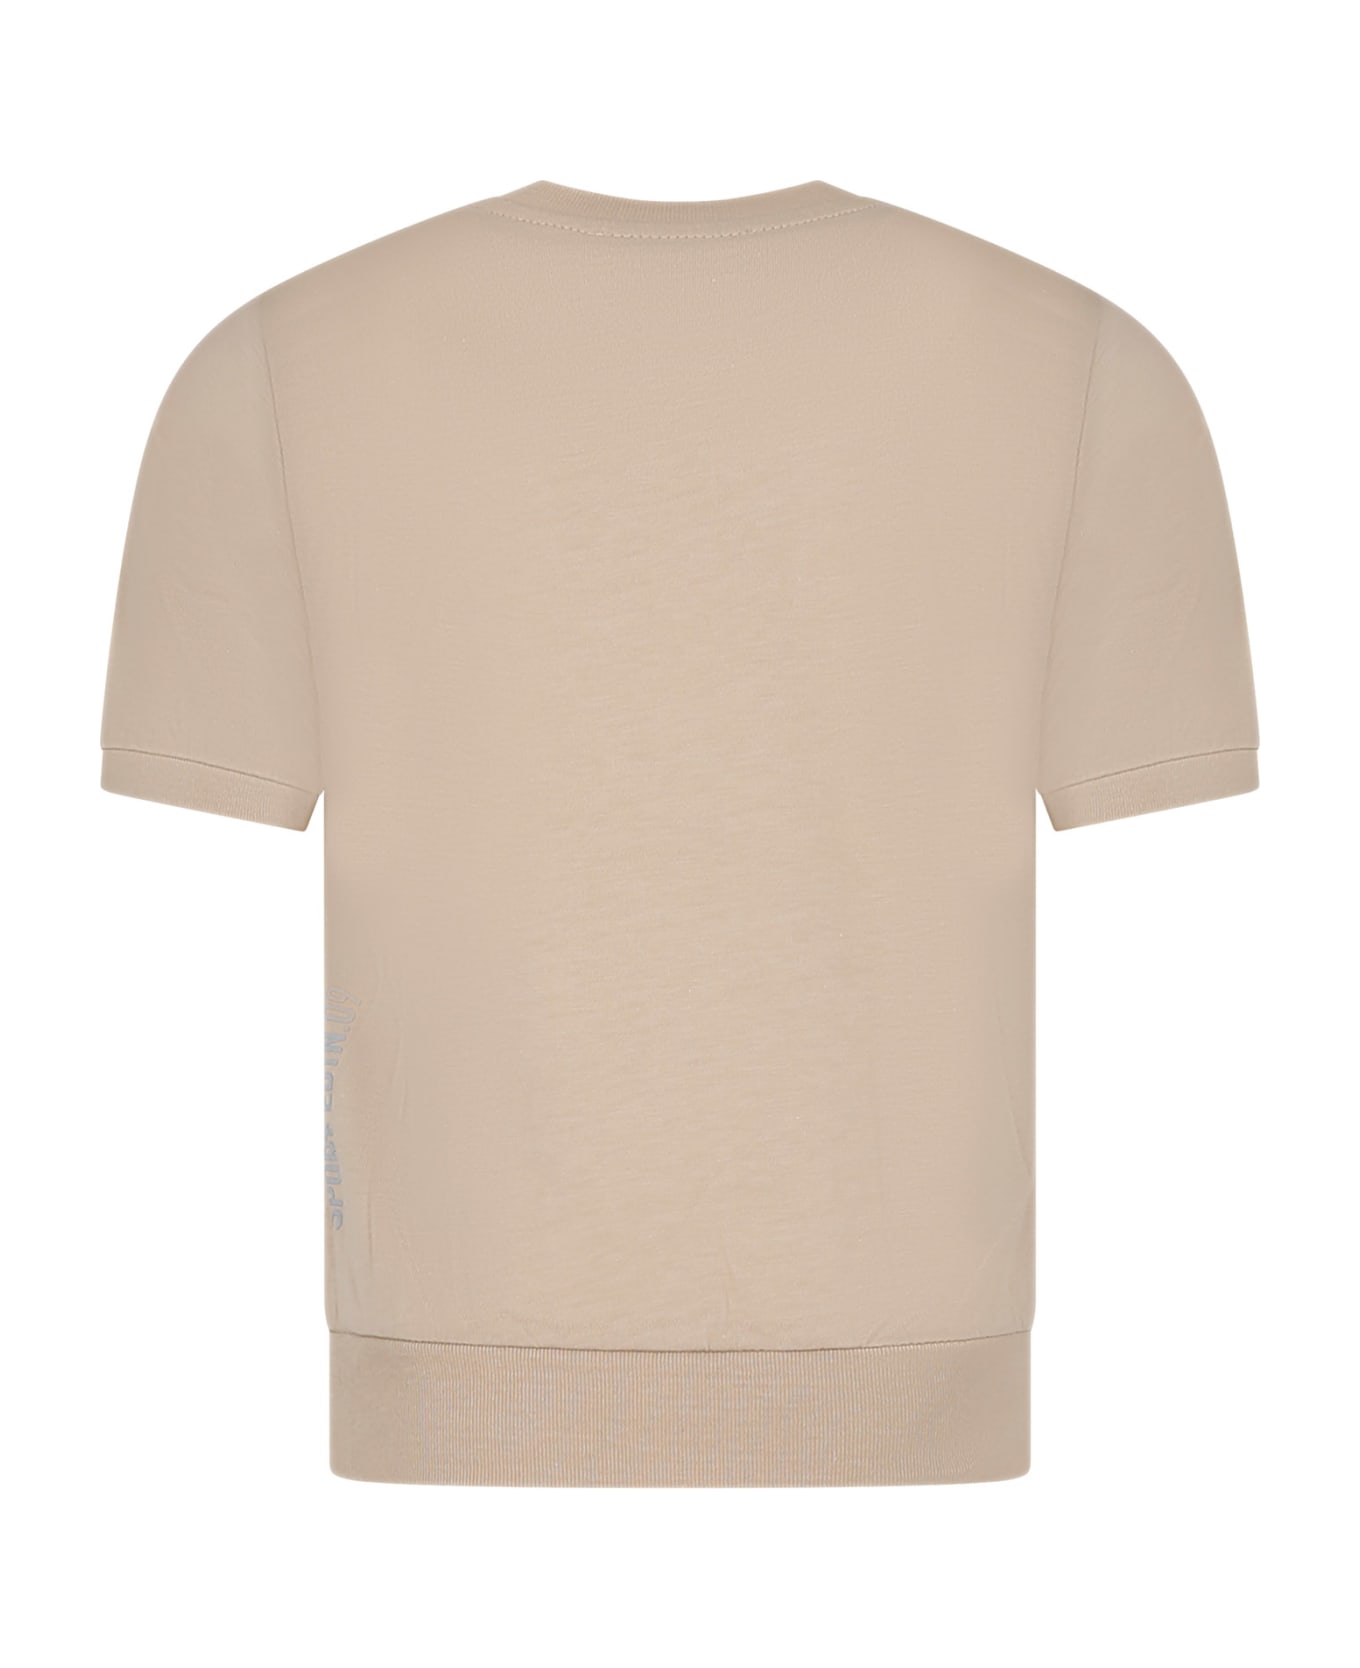 Dsquared2 Beige T-shirt For Boy With Logo - Beige